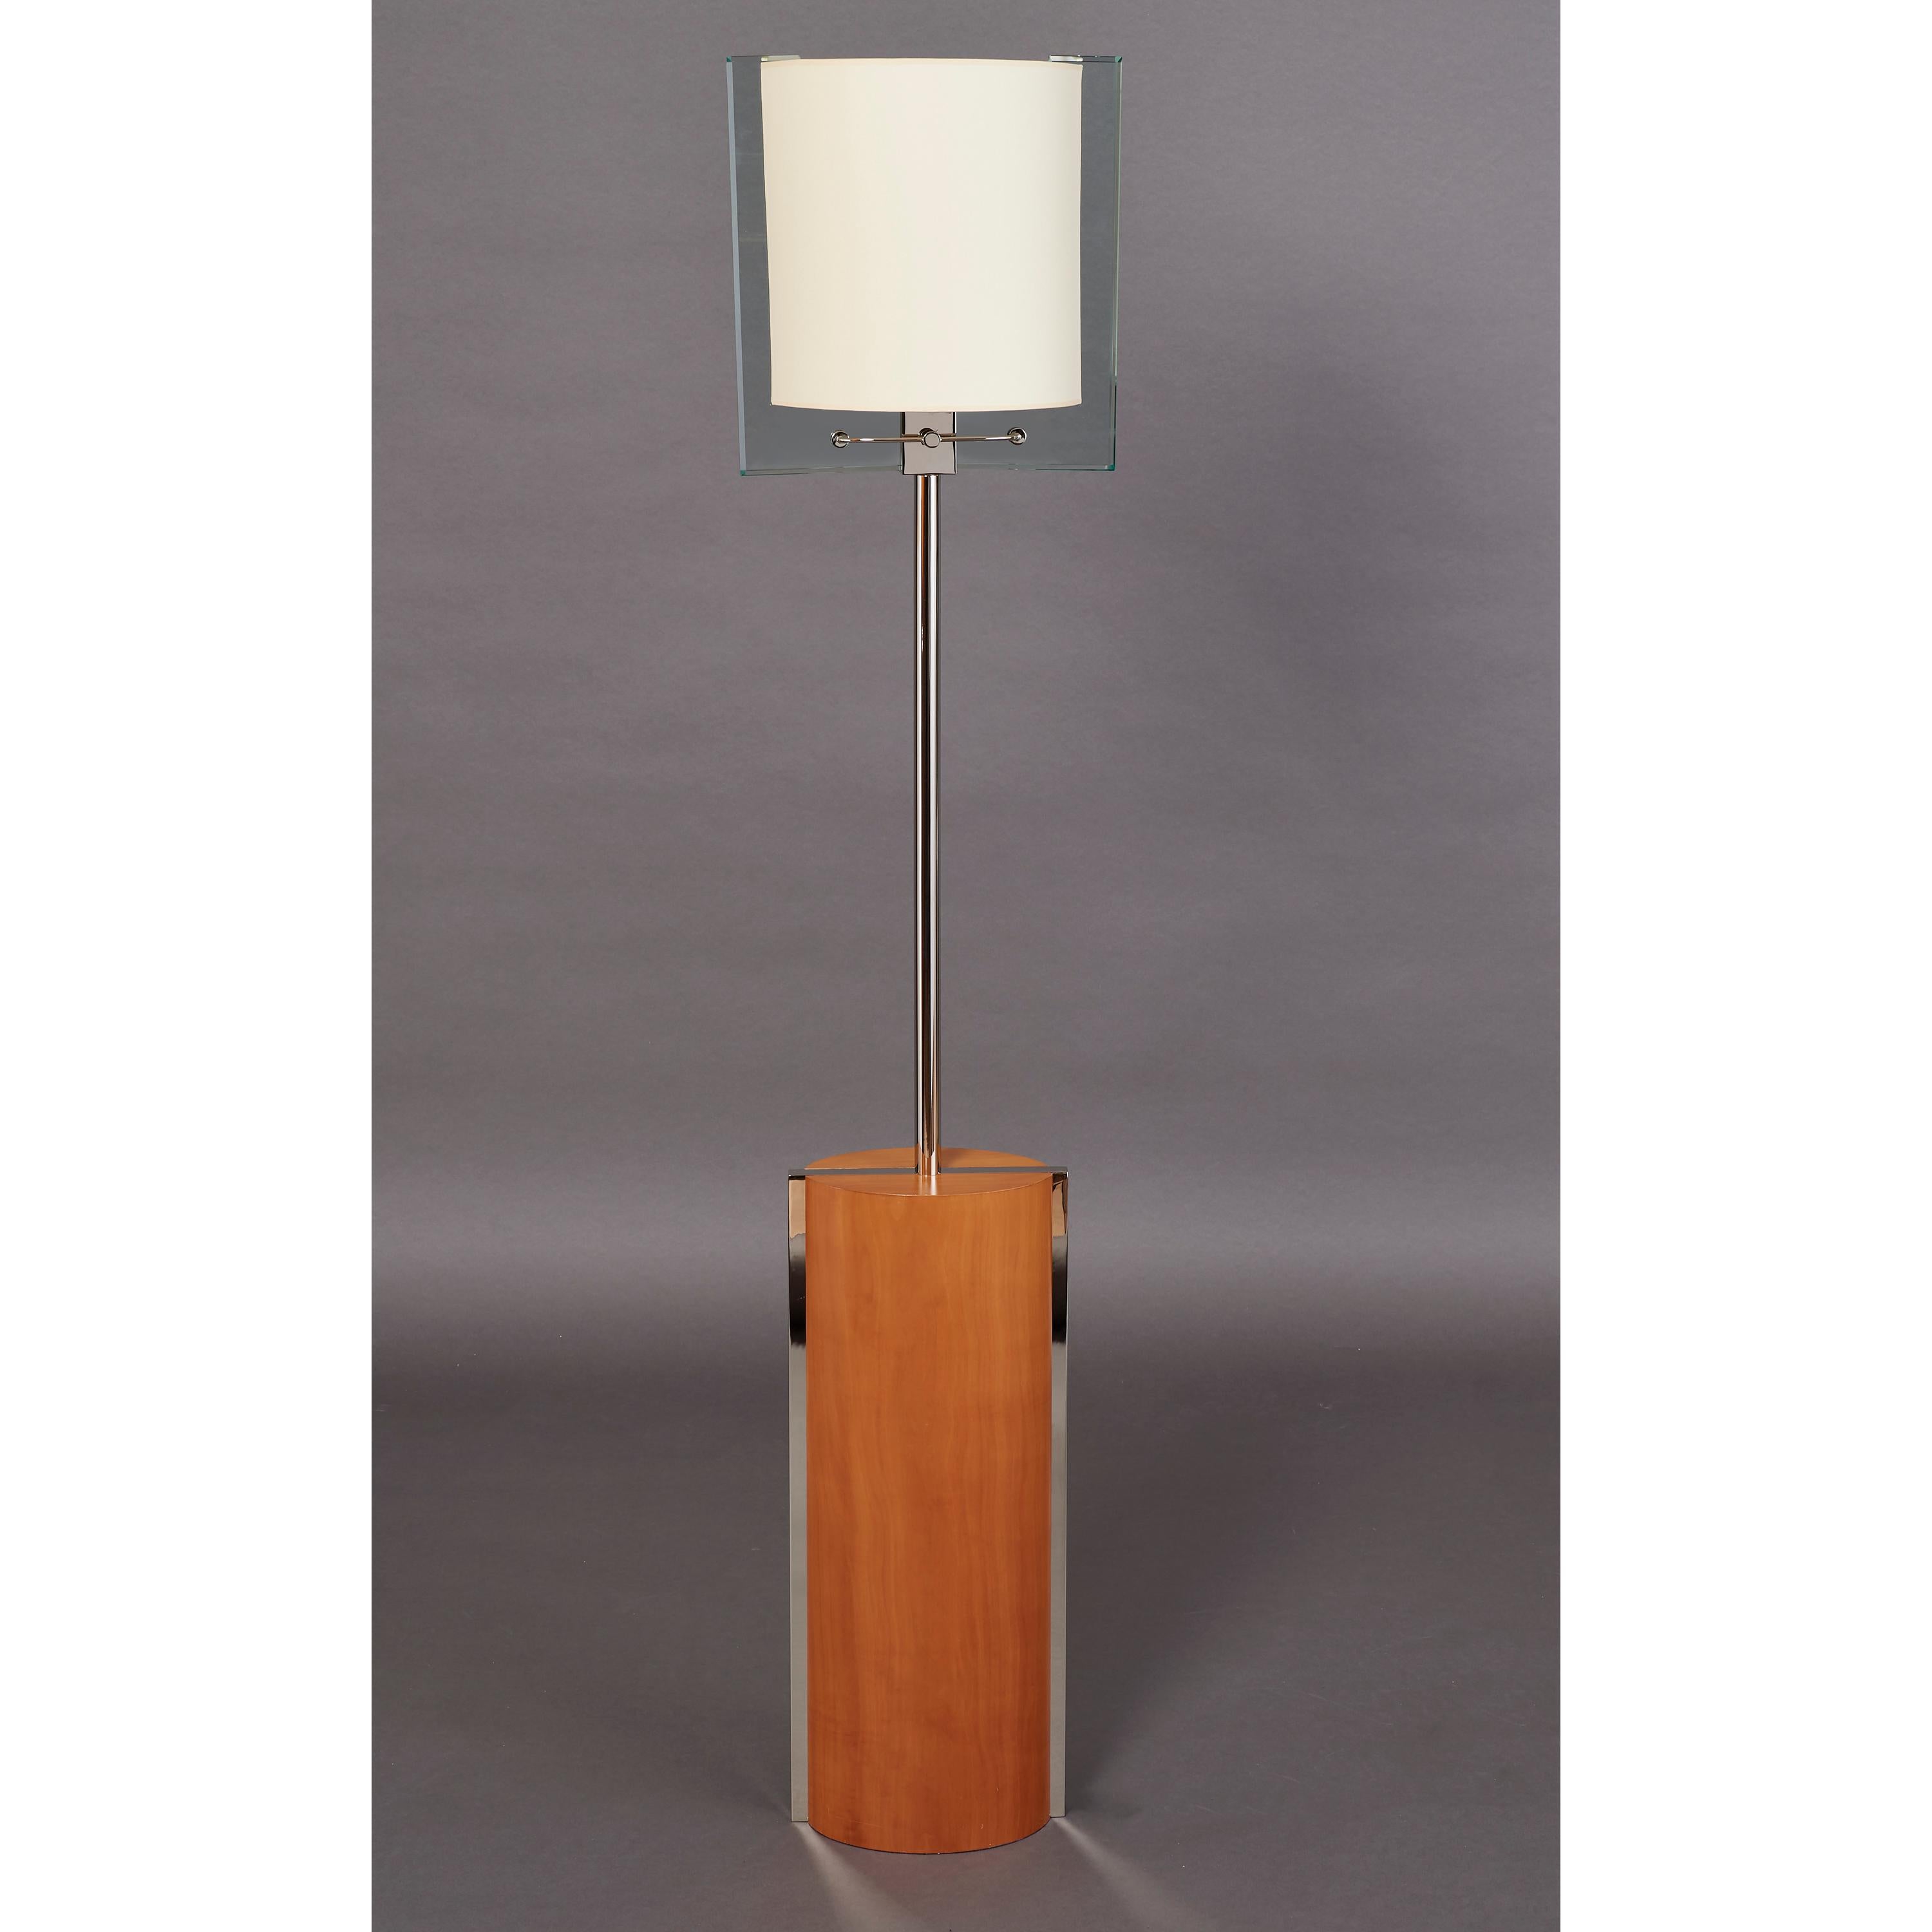 Nathalie Grenon for Fontana Arte
Standing lamp, part of a series originally commissioned by Bulgari from Fontana Arte. Wonderful scale for a reading lamp, not too tall.
Two available, one in nickeled metal, the other in polished brass with clear